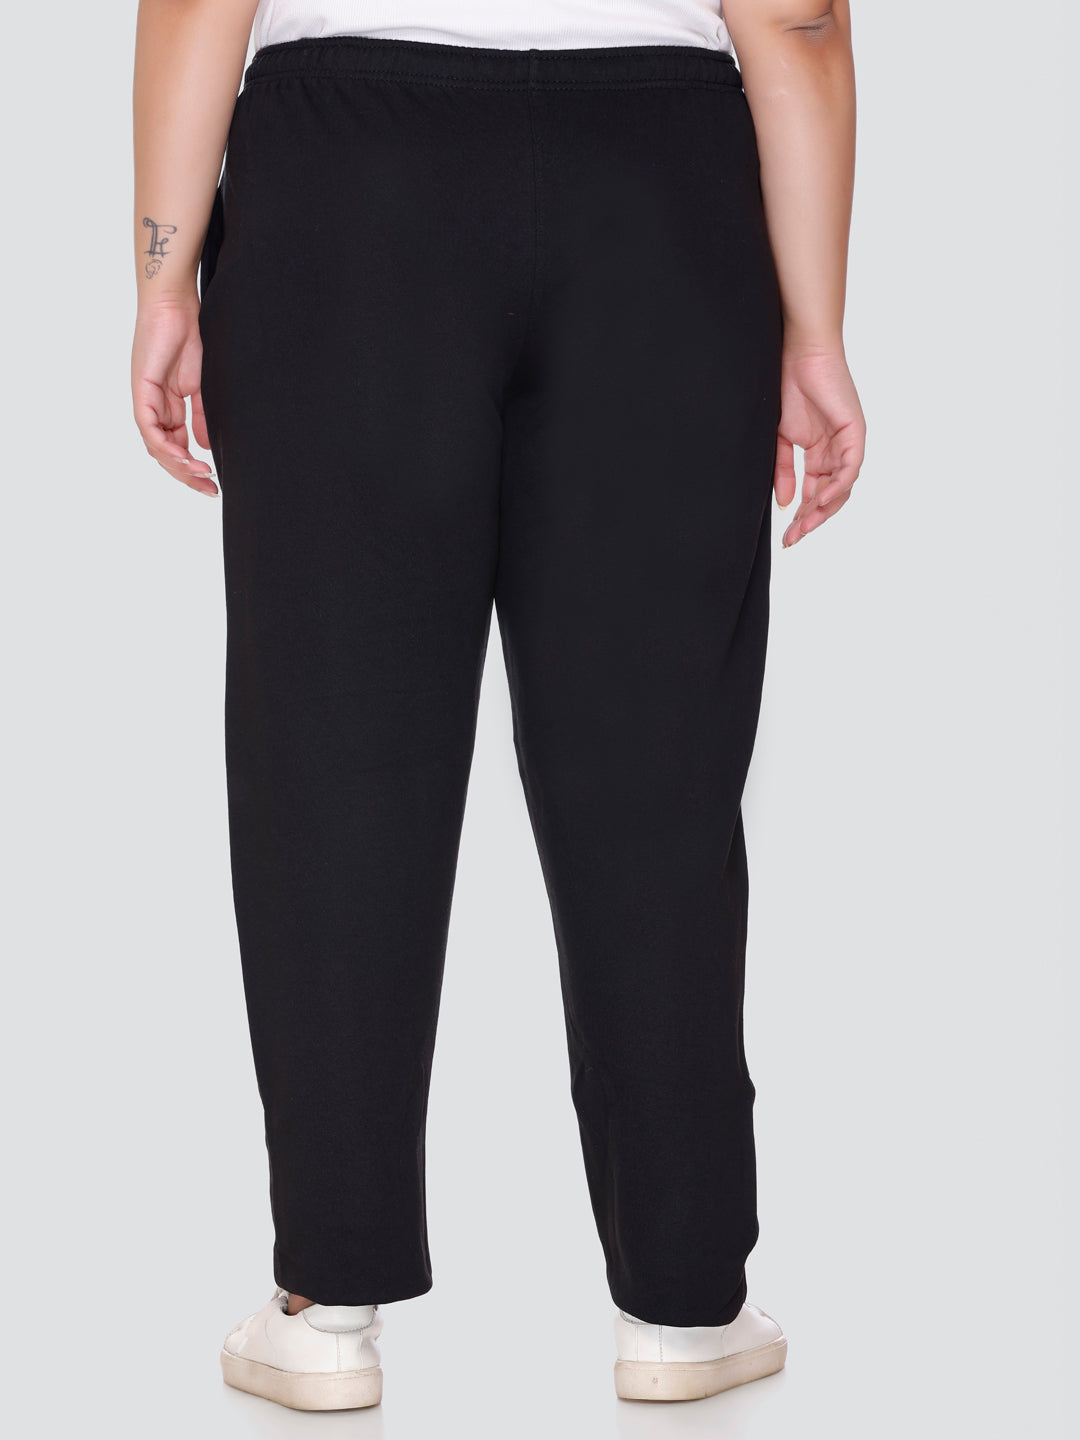 Buy Women's Track Pants Yoga Running and Gym ? Comfortable and Stylish  -TP-2 Online In India At Discounted Prices